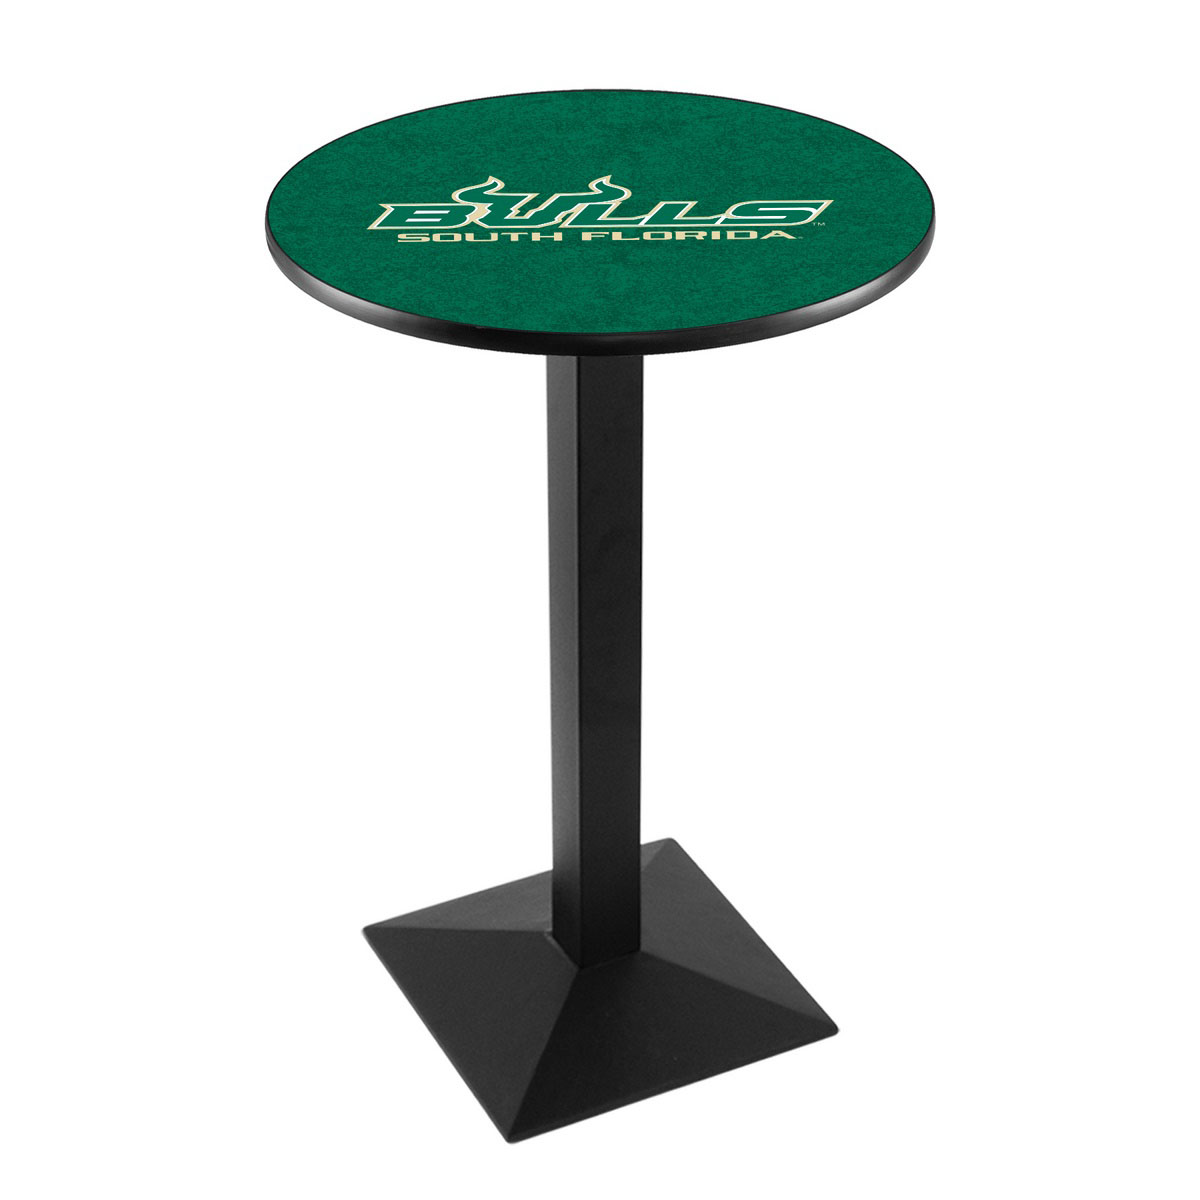 University Of South Florida Logo Pub Bar Table With Square Stand